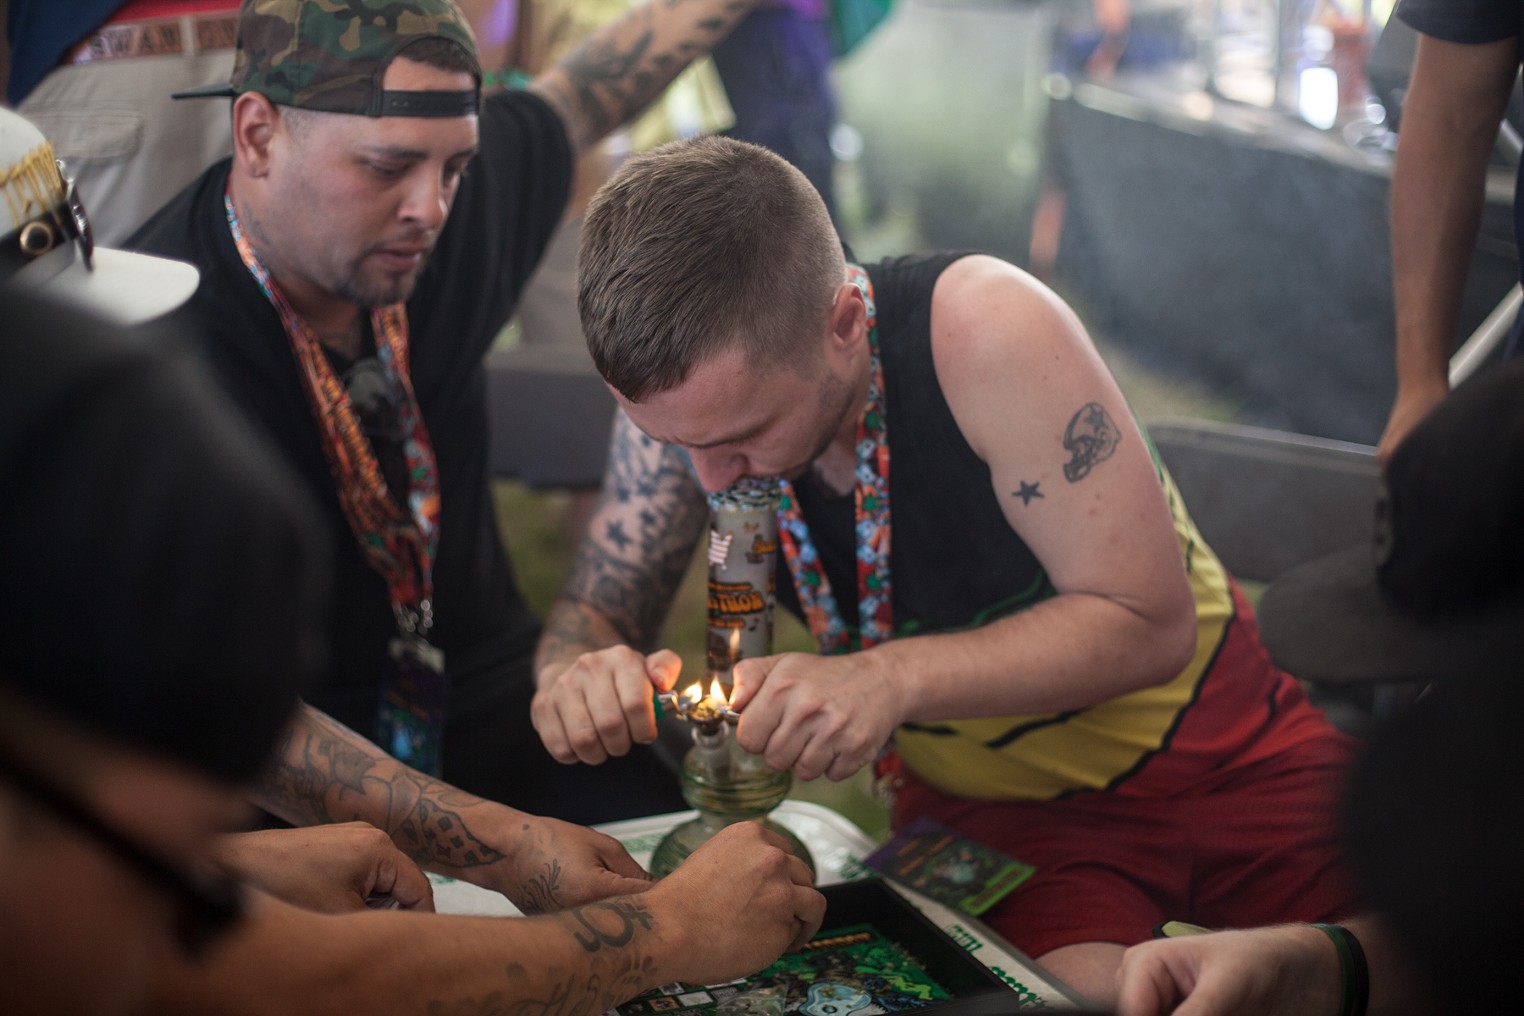 Competitive Weed Smokers Burned Through the Bong-A-Thon